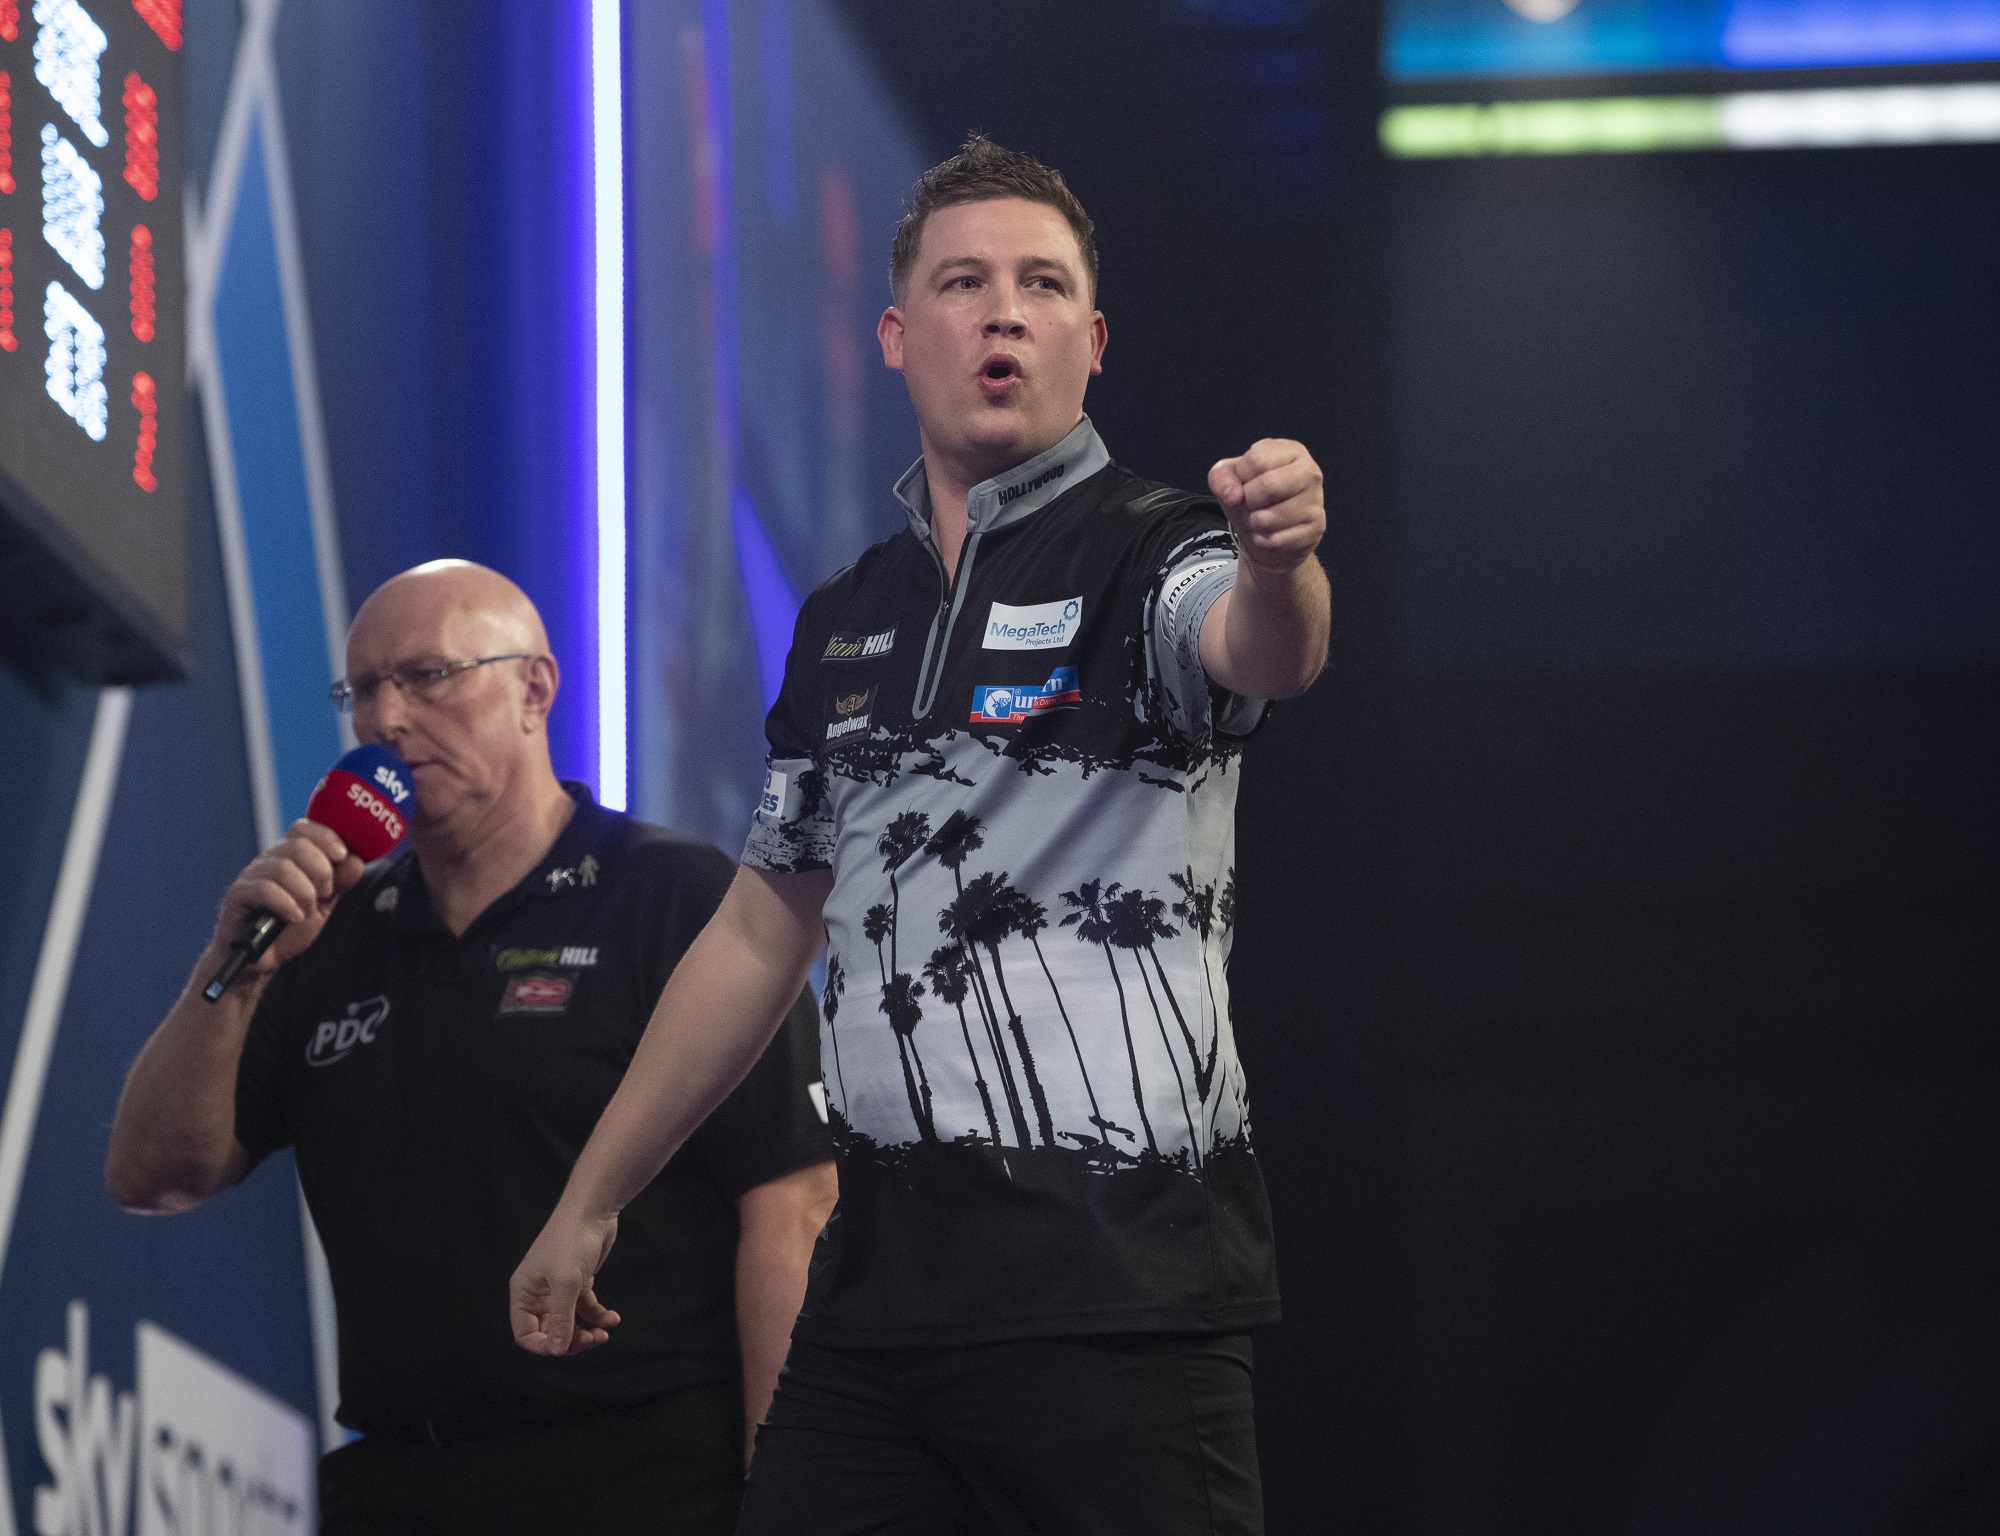 Day two of World Darts Championship sees Dobey stun Smith in classic